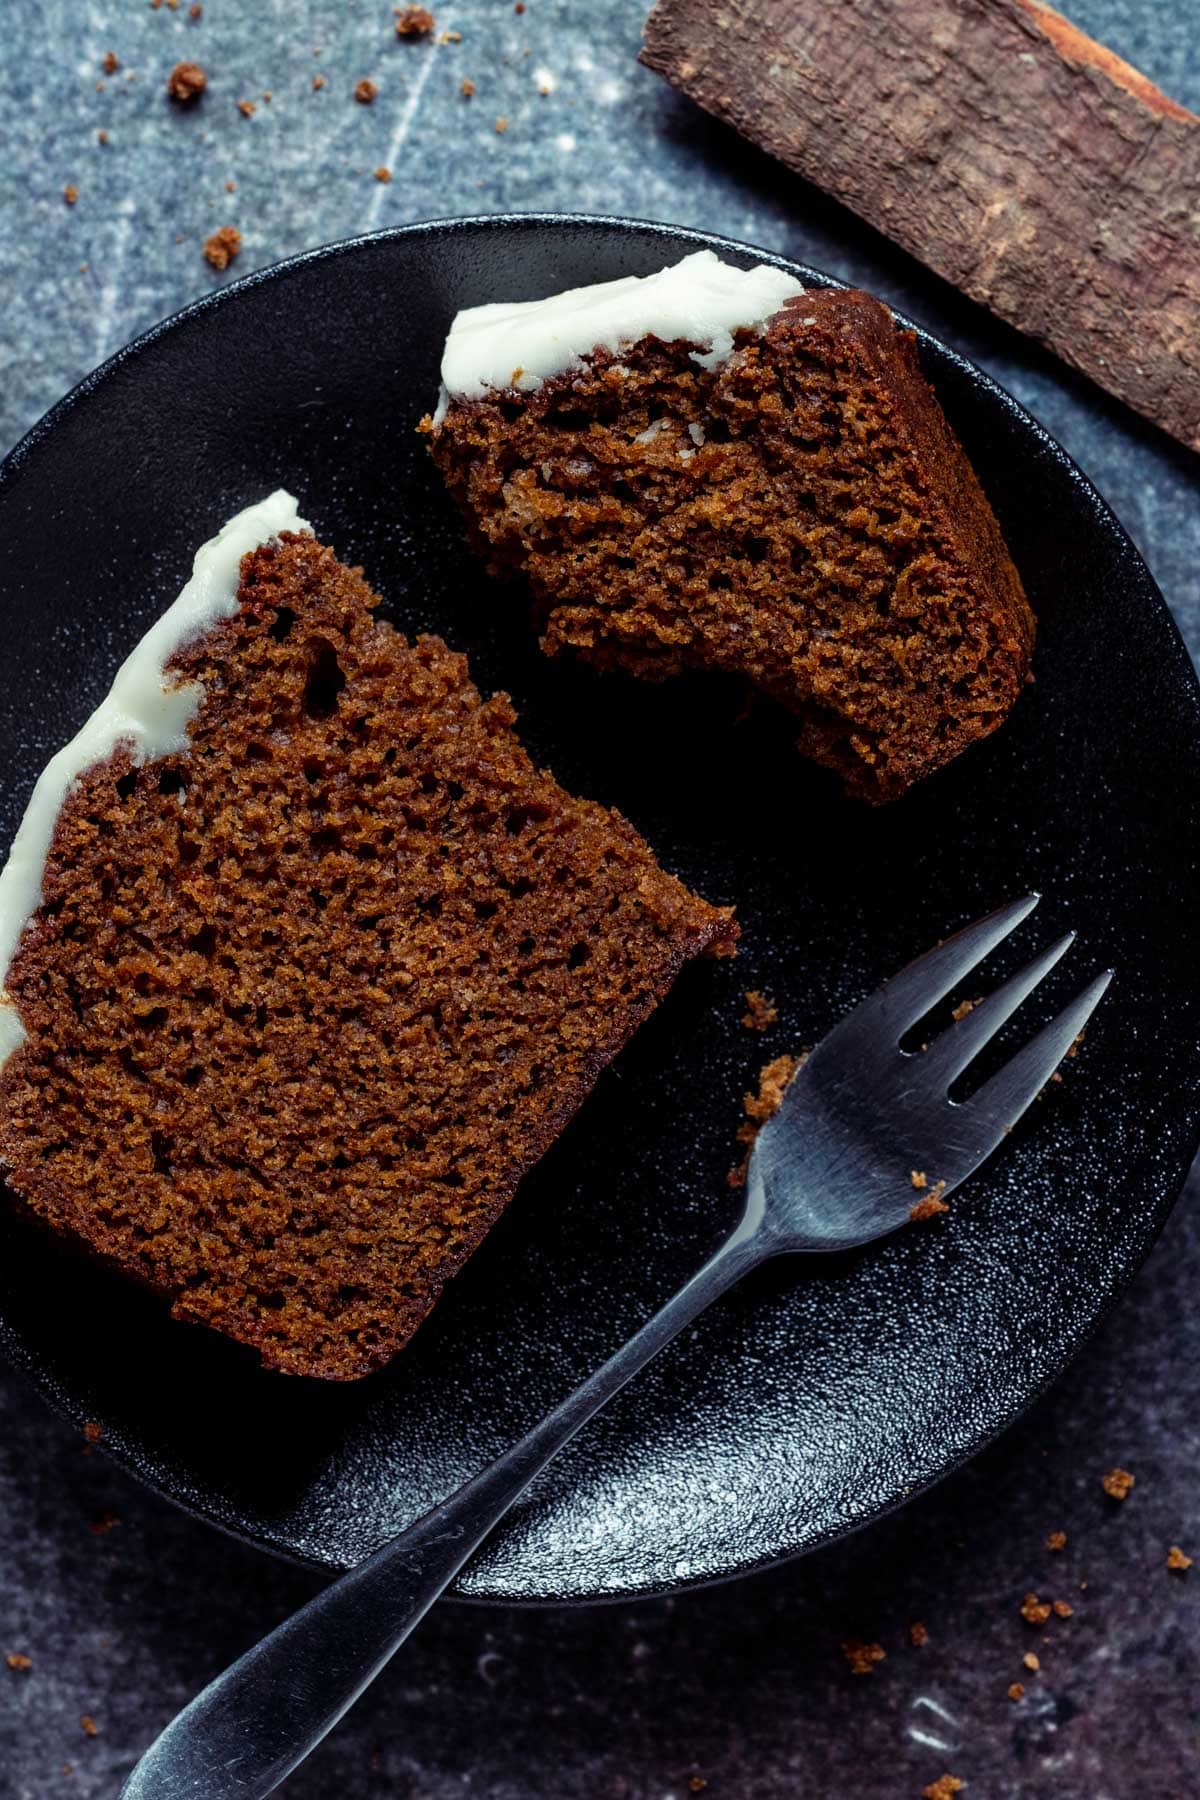 Slice of gingerbread loaf on a black plate with a cake fork.